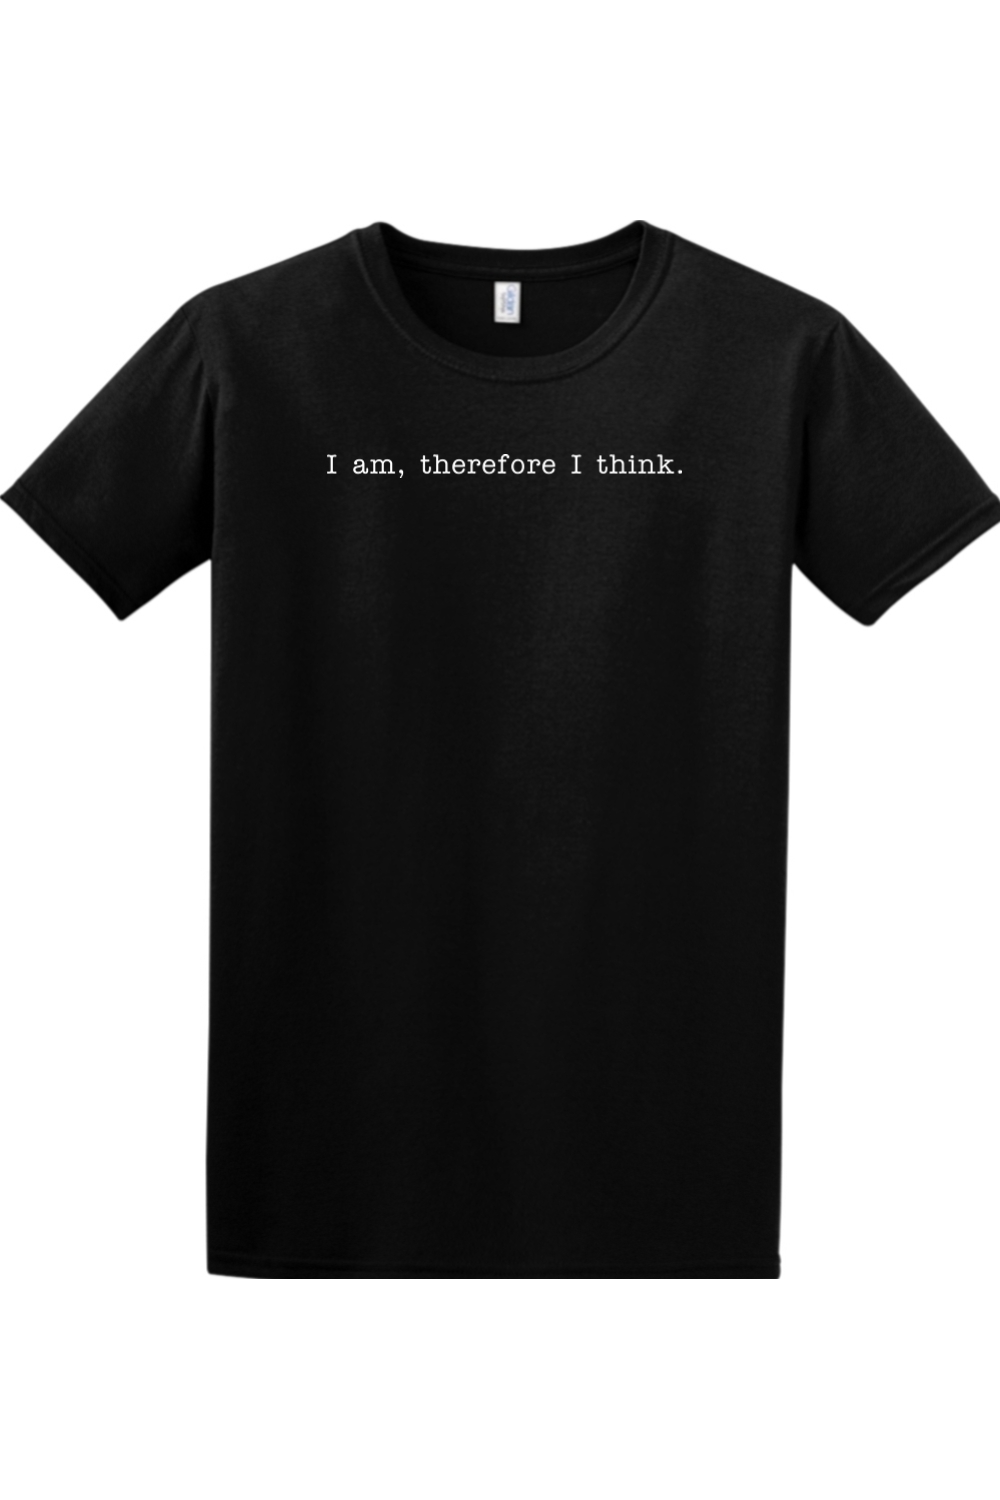 I am, Therefore I Think - Realism Philosophy Adult T-Shirt